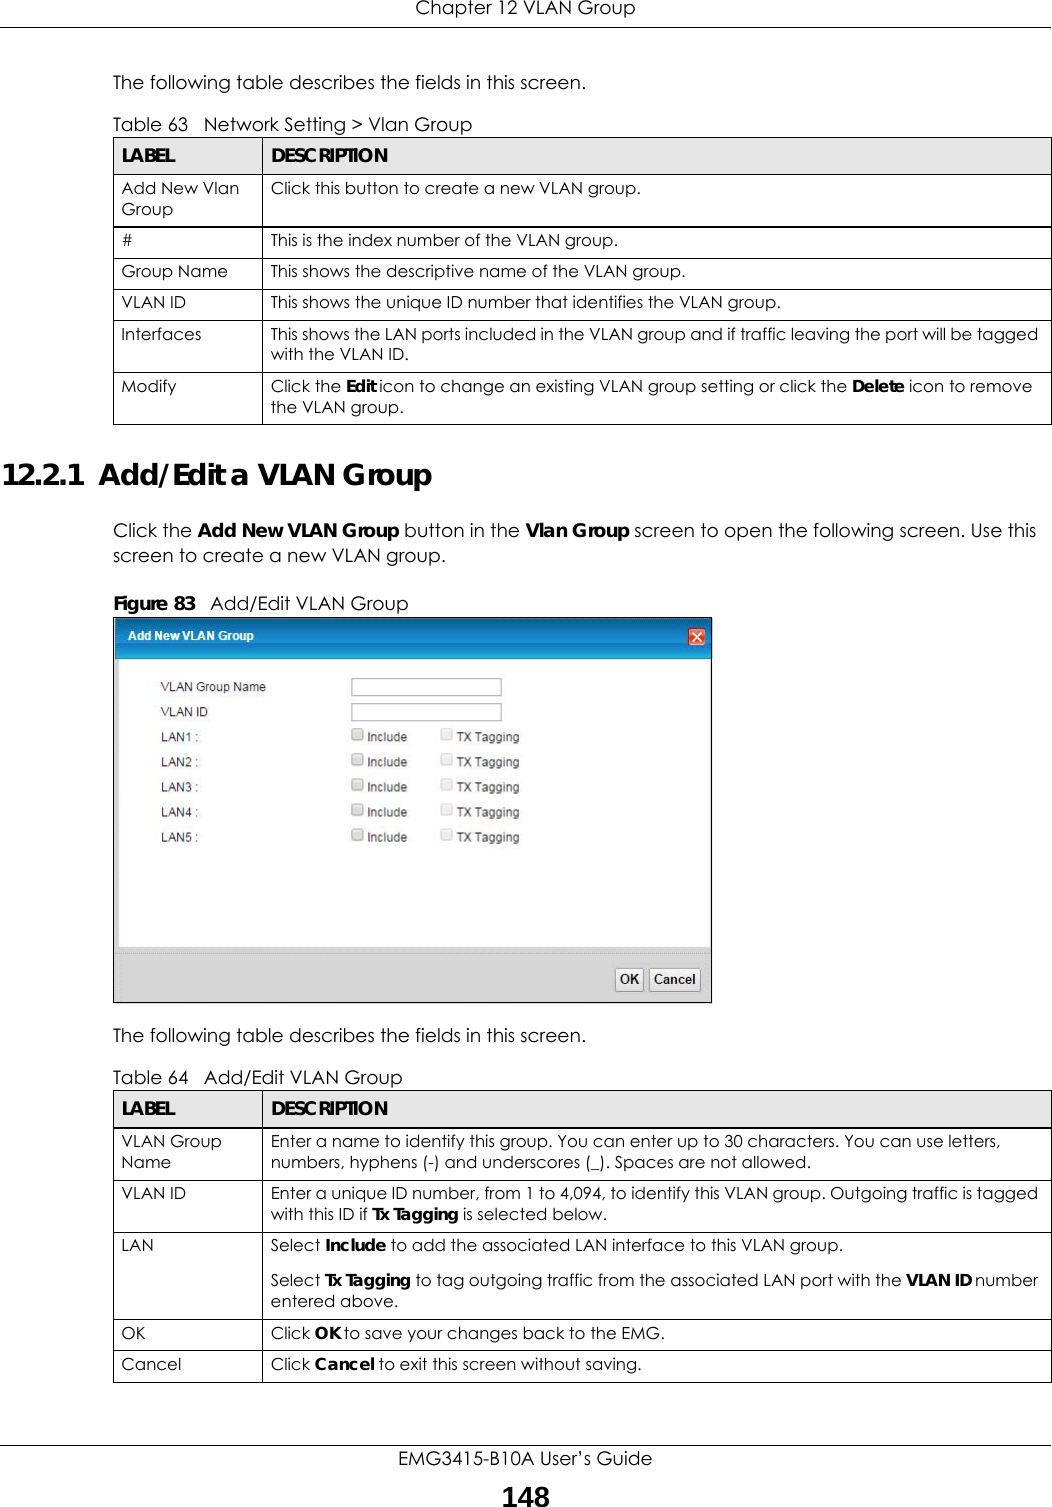 Chapter 12 VLAN GroupEMG3415-B10A User’s Guide148The following table describes the fields in this screen. 12.2.1  Add/Edit a VLAN Group Click the Add New VLAN Group button in the Vlan Group screen to open the following screen. Use this screen to create a new VLAN group. Figure 83   Add/Edit VLAN Group The following table describes the fields in this screen. Table 63   Network Setting &gt; Vlan GroupLABEL DESCRIPTIONAdd New Vlan GroupClick this button to create a new VLAN group.#This is the index number of the VLAN group.Group Name This shows the descriptive name of the VLAN group.VLAN ID This shows the unique ID number that identifies the VLAN group.Interfaces This shows the LAN ports included in the VLAN group and if traffic leaving the port will be tagged with the VLAN ID.Modify Click the Edit icon to change an existing VLAN group setting or click the Delete icon to remove the VLAN group.Table 64   Add/Edit VLAN GroupLABEL DESCRIPTIONVLAN Group NameEnter a name to identify this group. You can enter up to 30 characters. You can use letters, numbers, hyphens (-) and underscores (_). Spaces are not allowed.VLAN ID Enter a unique ID number, from 1 to 4,094, to identify this VLAN group. Outgoing traffic is tagged with this ID if Tx Tagging is selected below.LAN Select Include to add the associated LAN interface to this VLAN group.Select Tx Tagging to tag outgoing traffic from the associated LAN port with the VLAN ID number entered above.OK Click OK to save your changes back to the EMG.Cancel Click Cancel to exit this screen without saving.